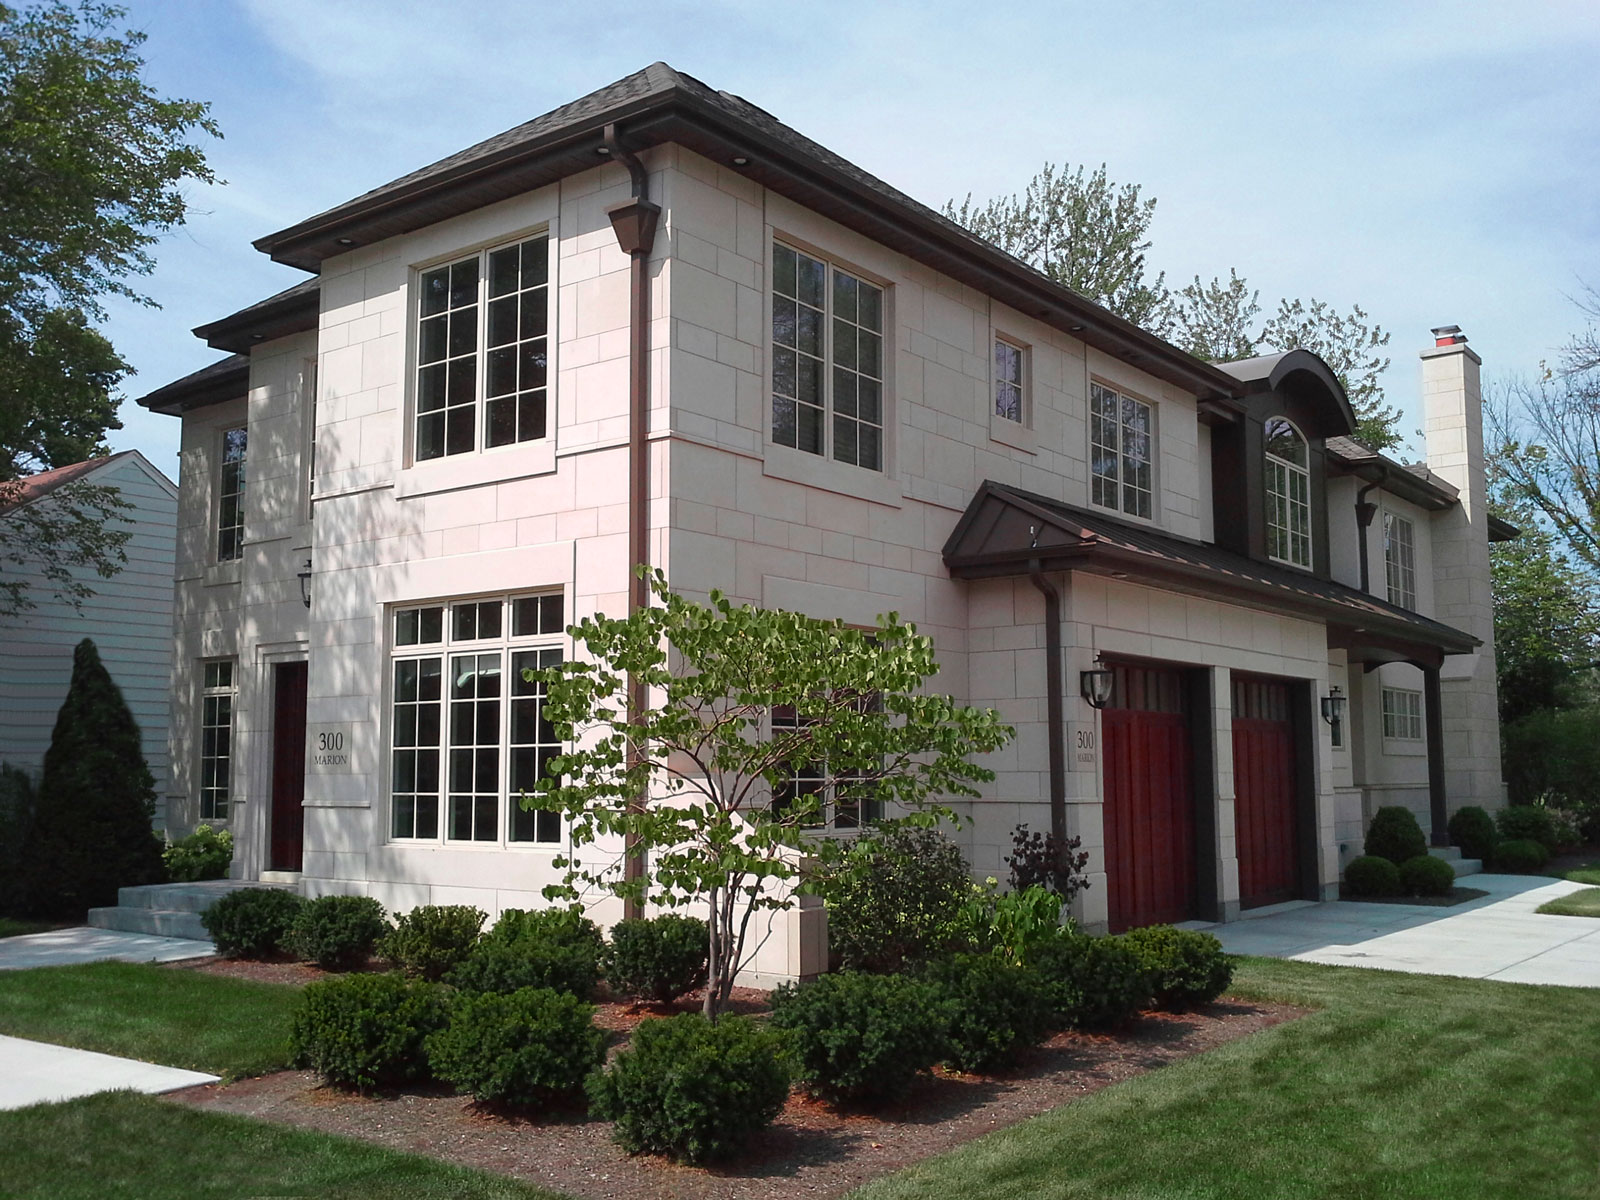 New Construction French Manor styled home with cut stone exterior in Elmhurst, IL.